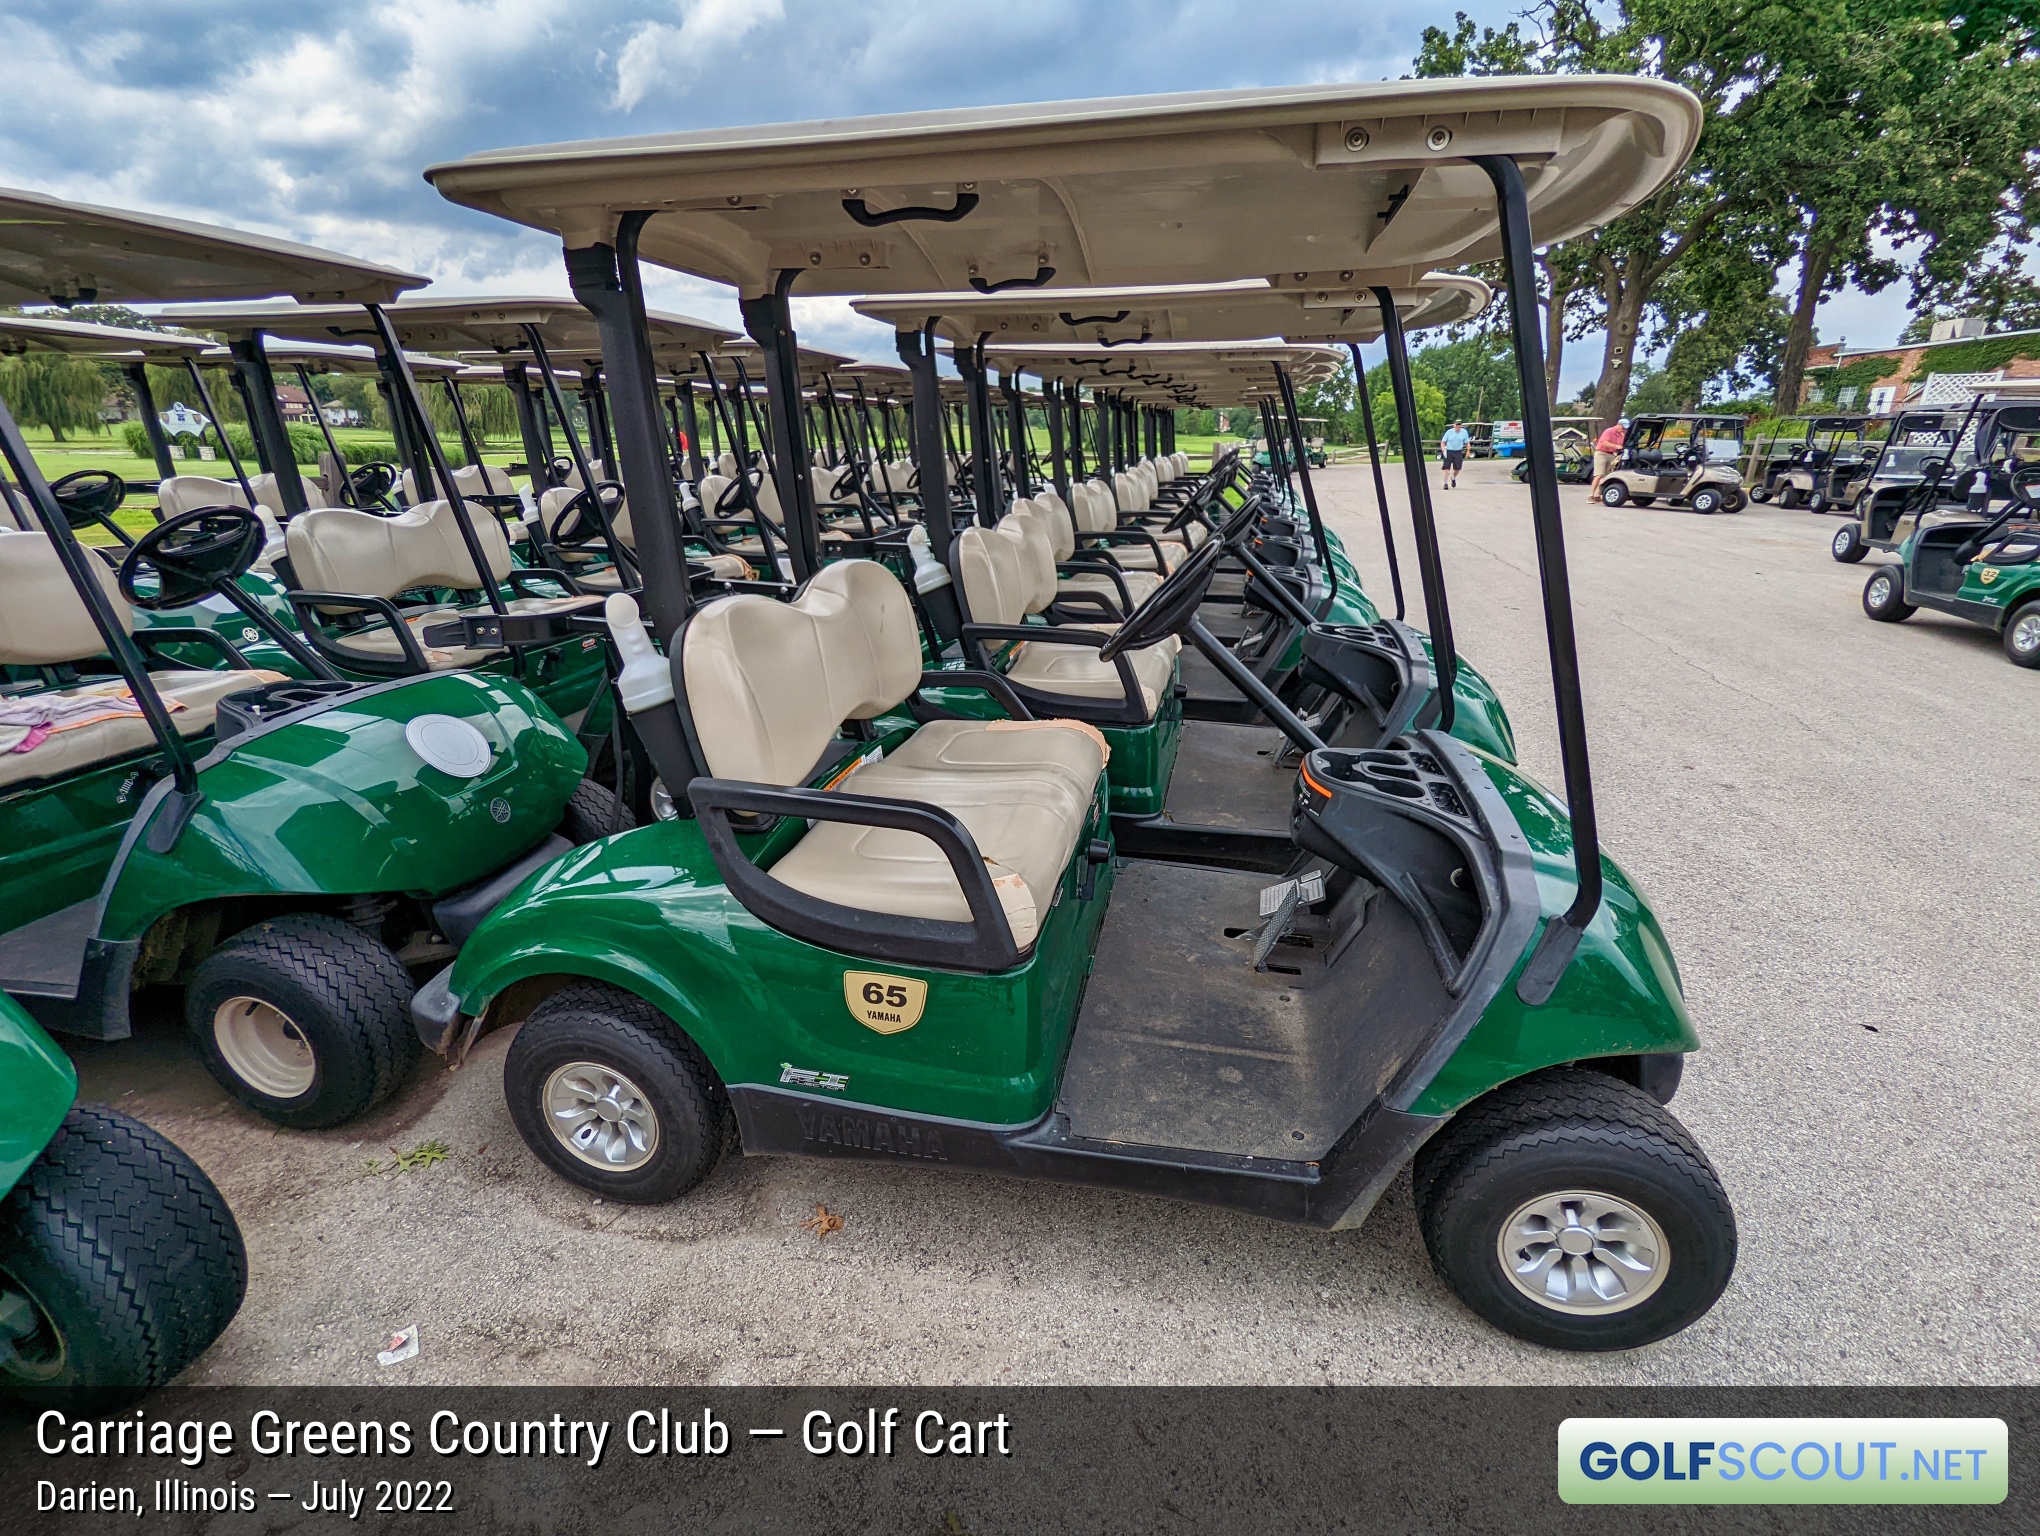 Photo of the golf carts at Carriage Greens Country Club in Darien, Illinois. 